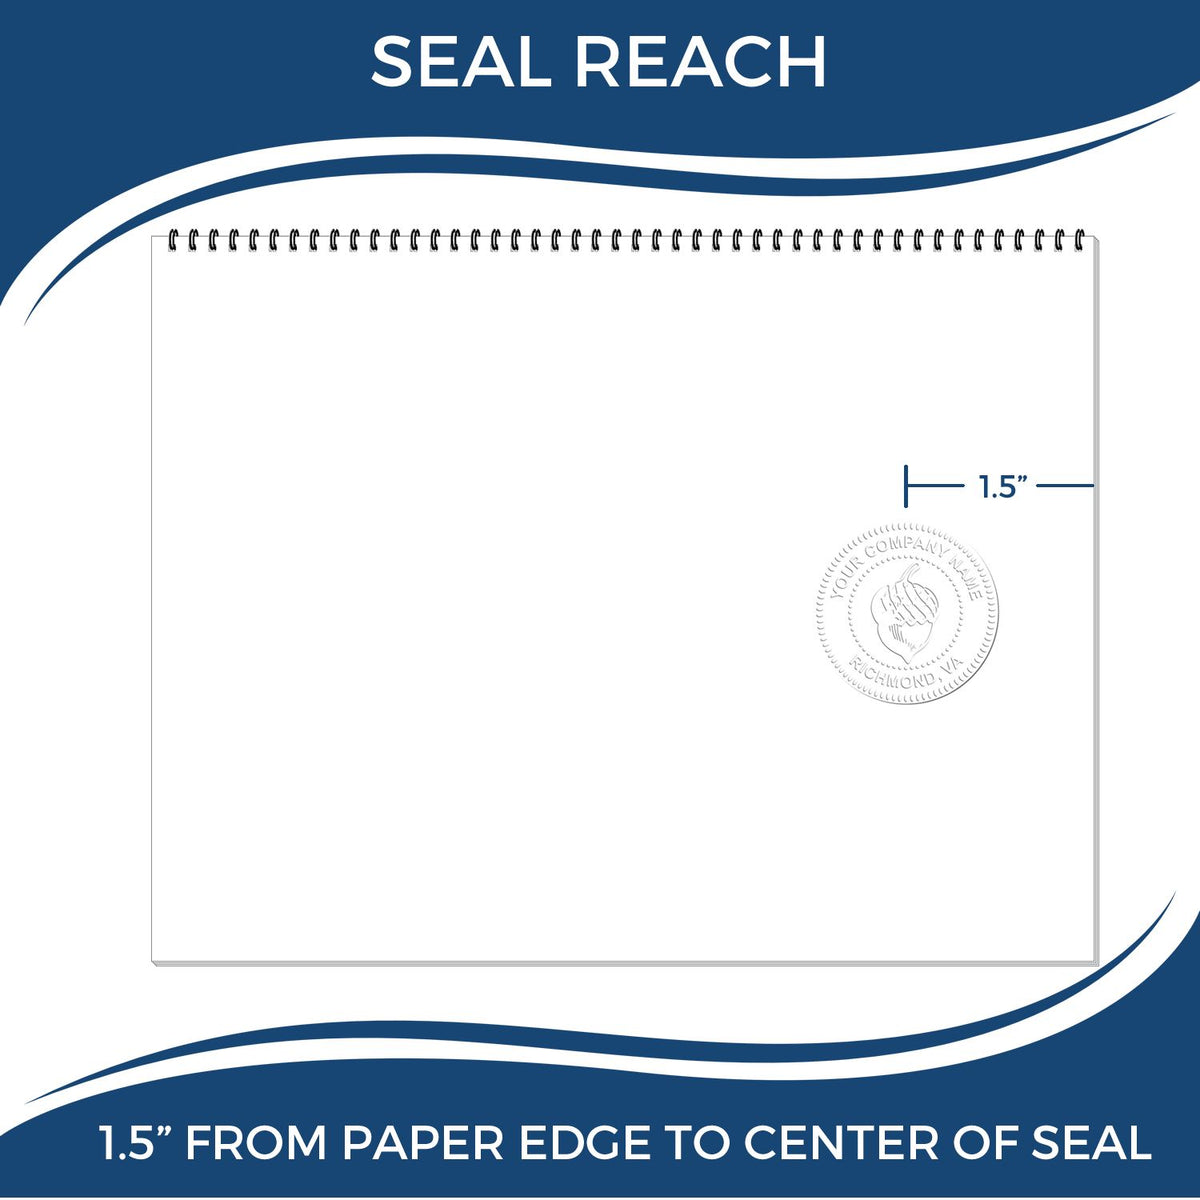 An infographic showing the seal reach which is represented by a ruler and a miniature seal image of the Hybrid Texas Architect Seal